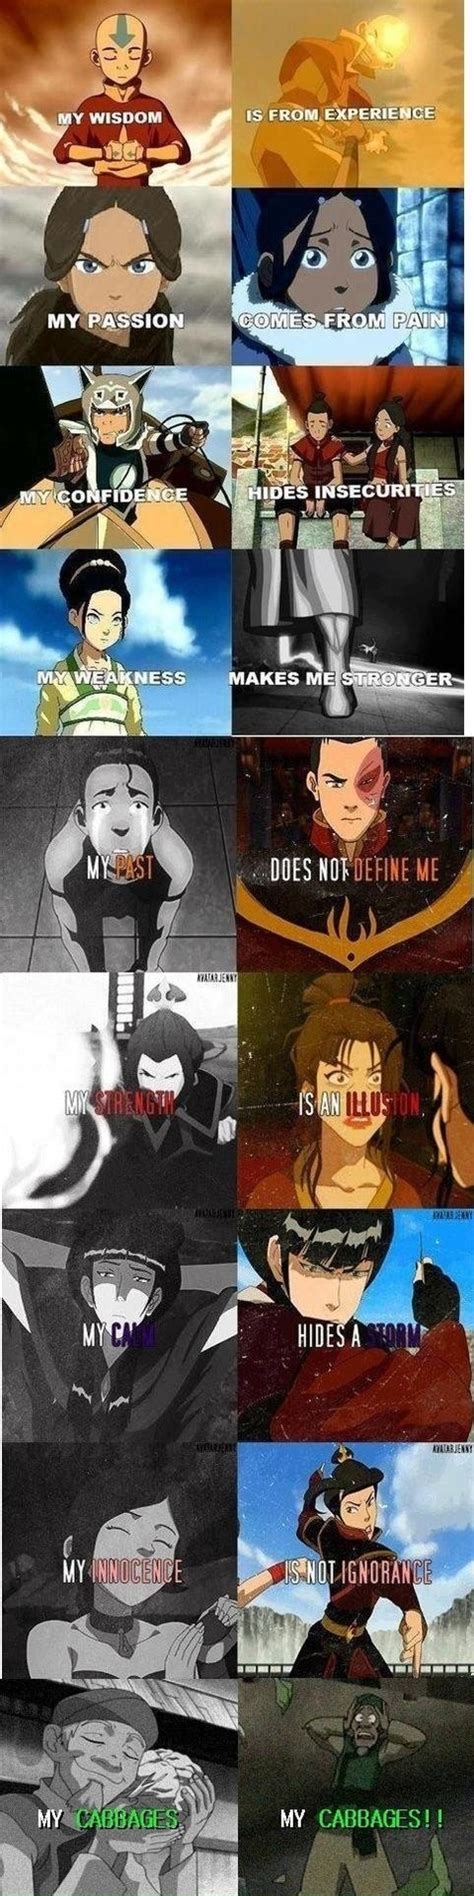 avatar cartoons anime funny pictures and best jokes comics images video humor